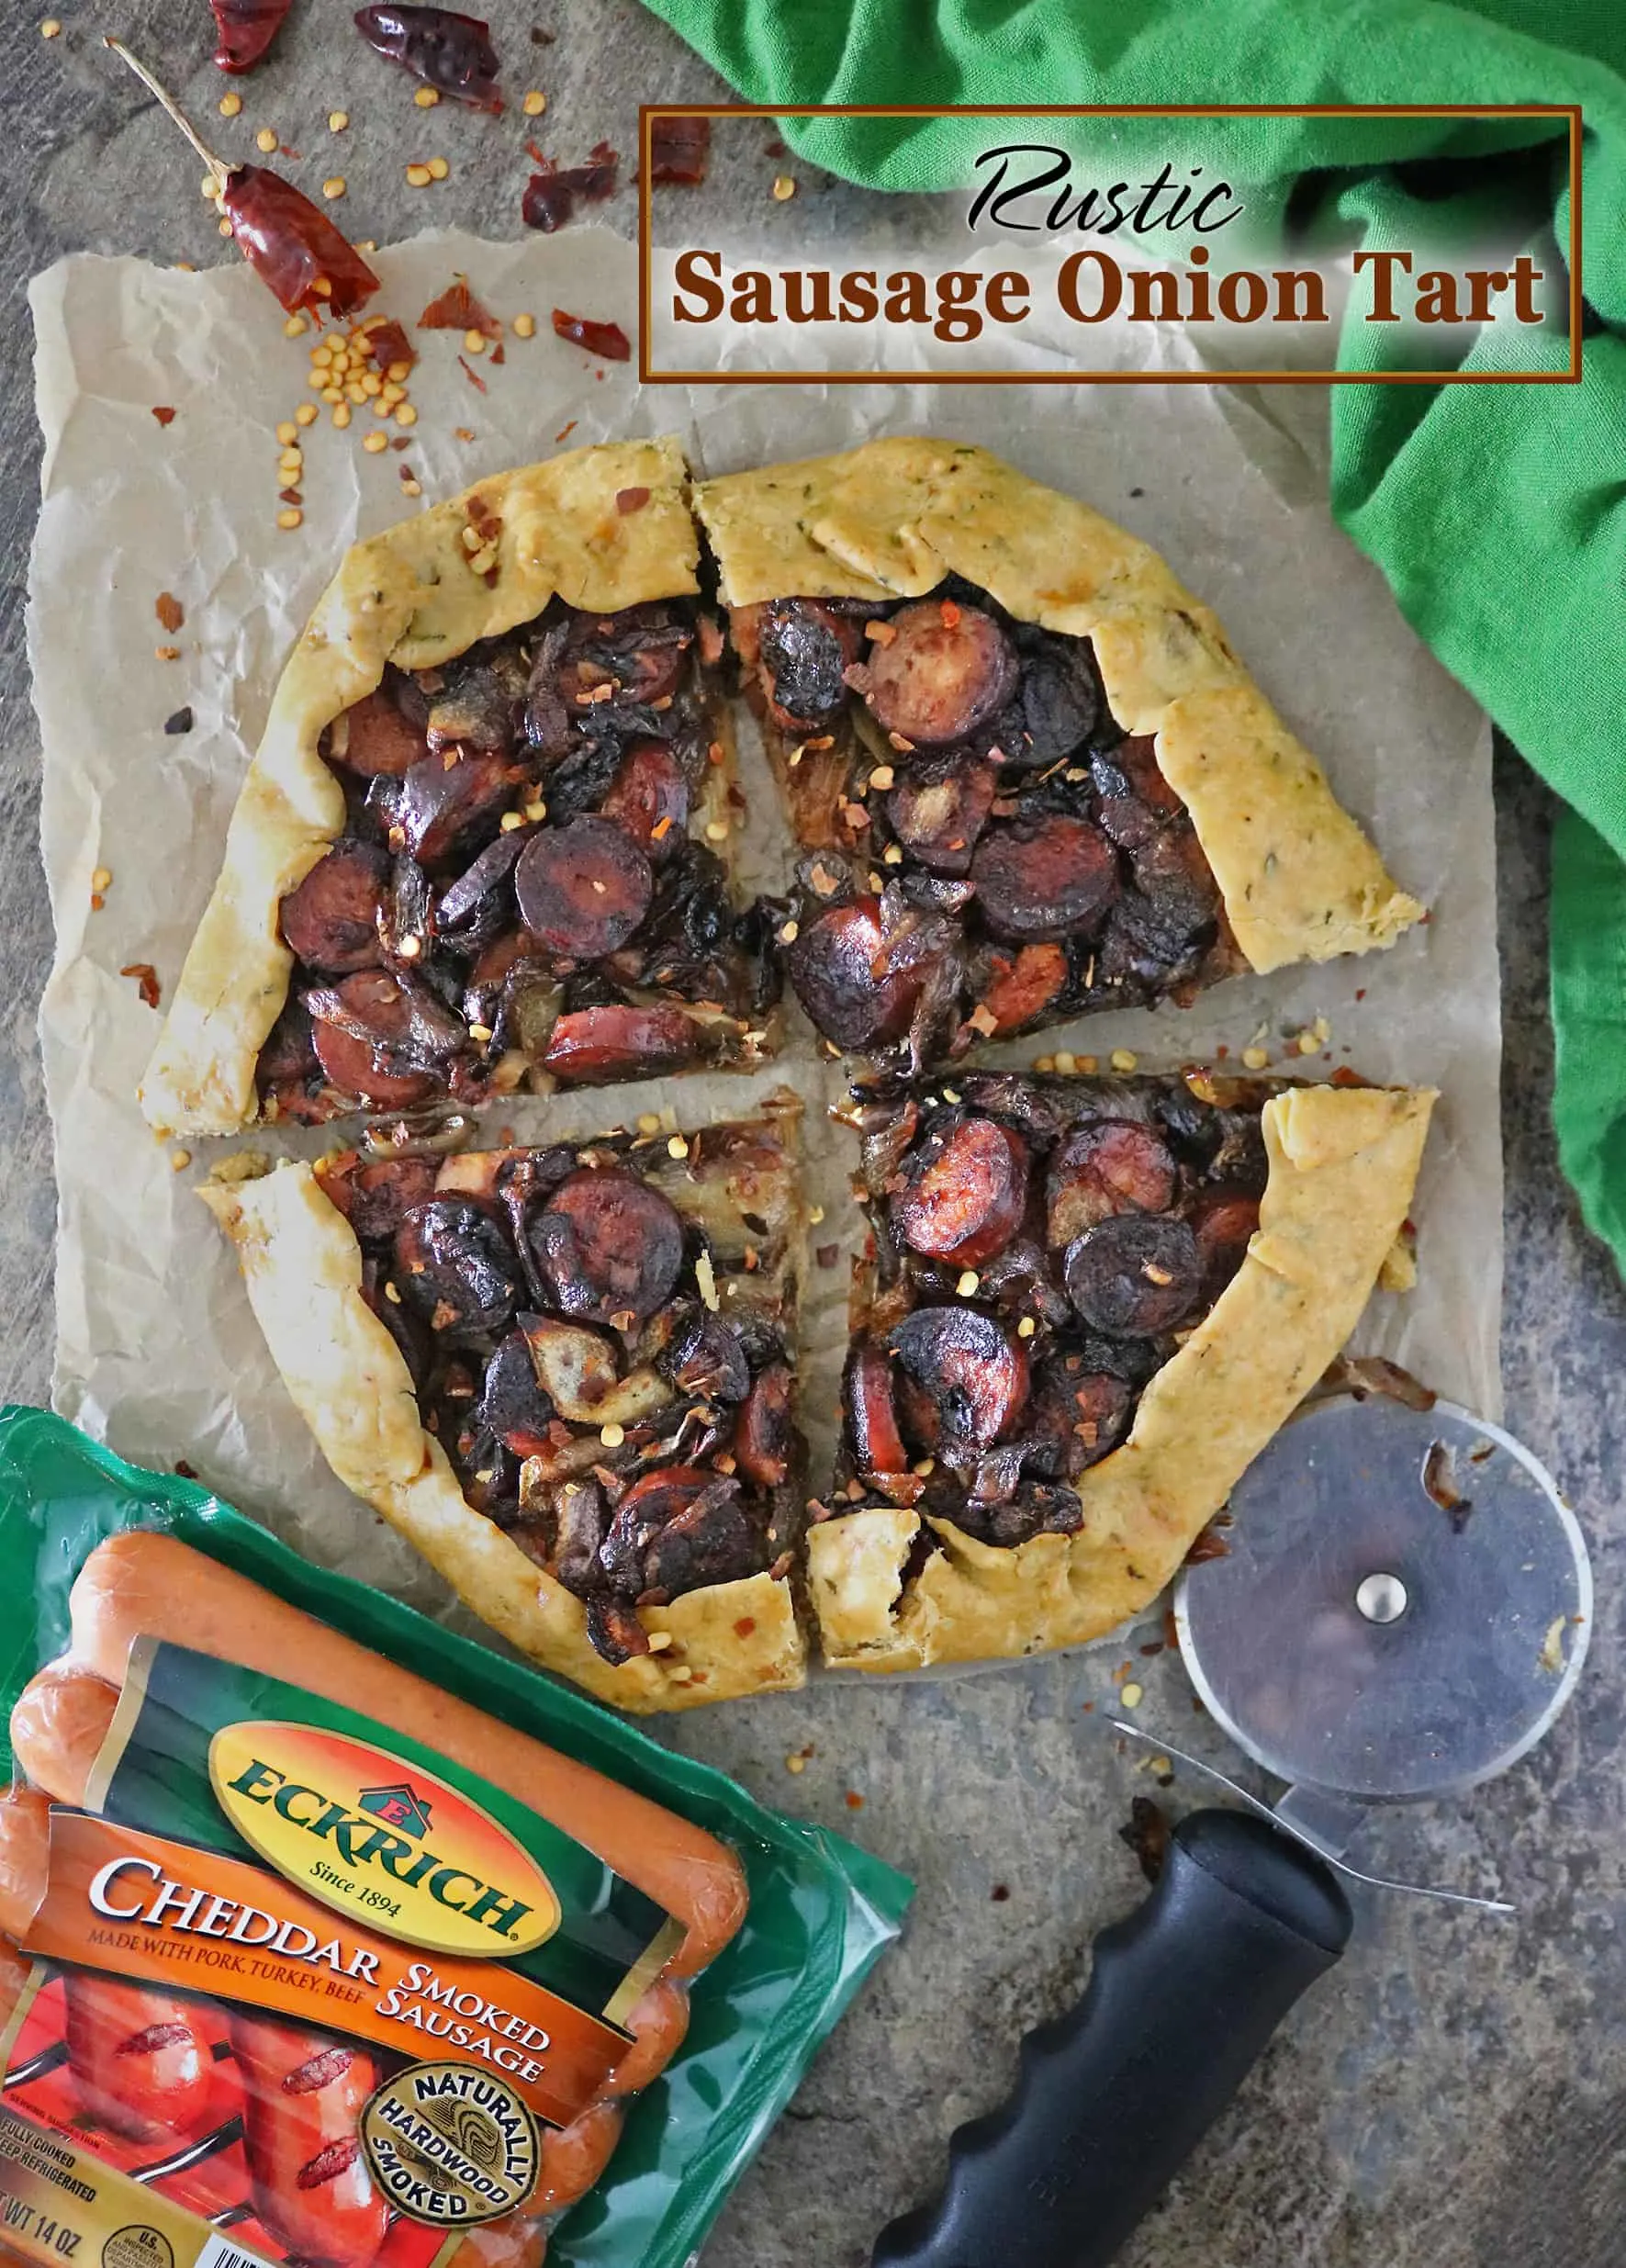  Sweet and smoky caramelized onions combine with flavorful Eckrich sausage in this easy Rustic Sausage Onion Tart. Enjoy it as a snack or make it into a tasty meal with some steamed broccoli to enjoy with family and friends. 